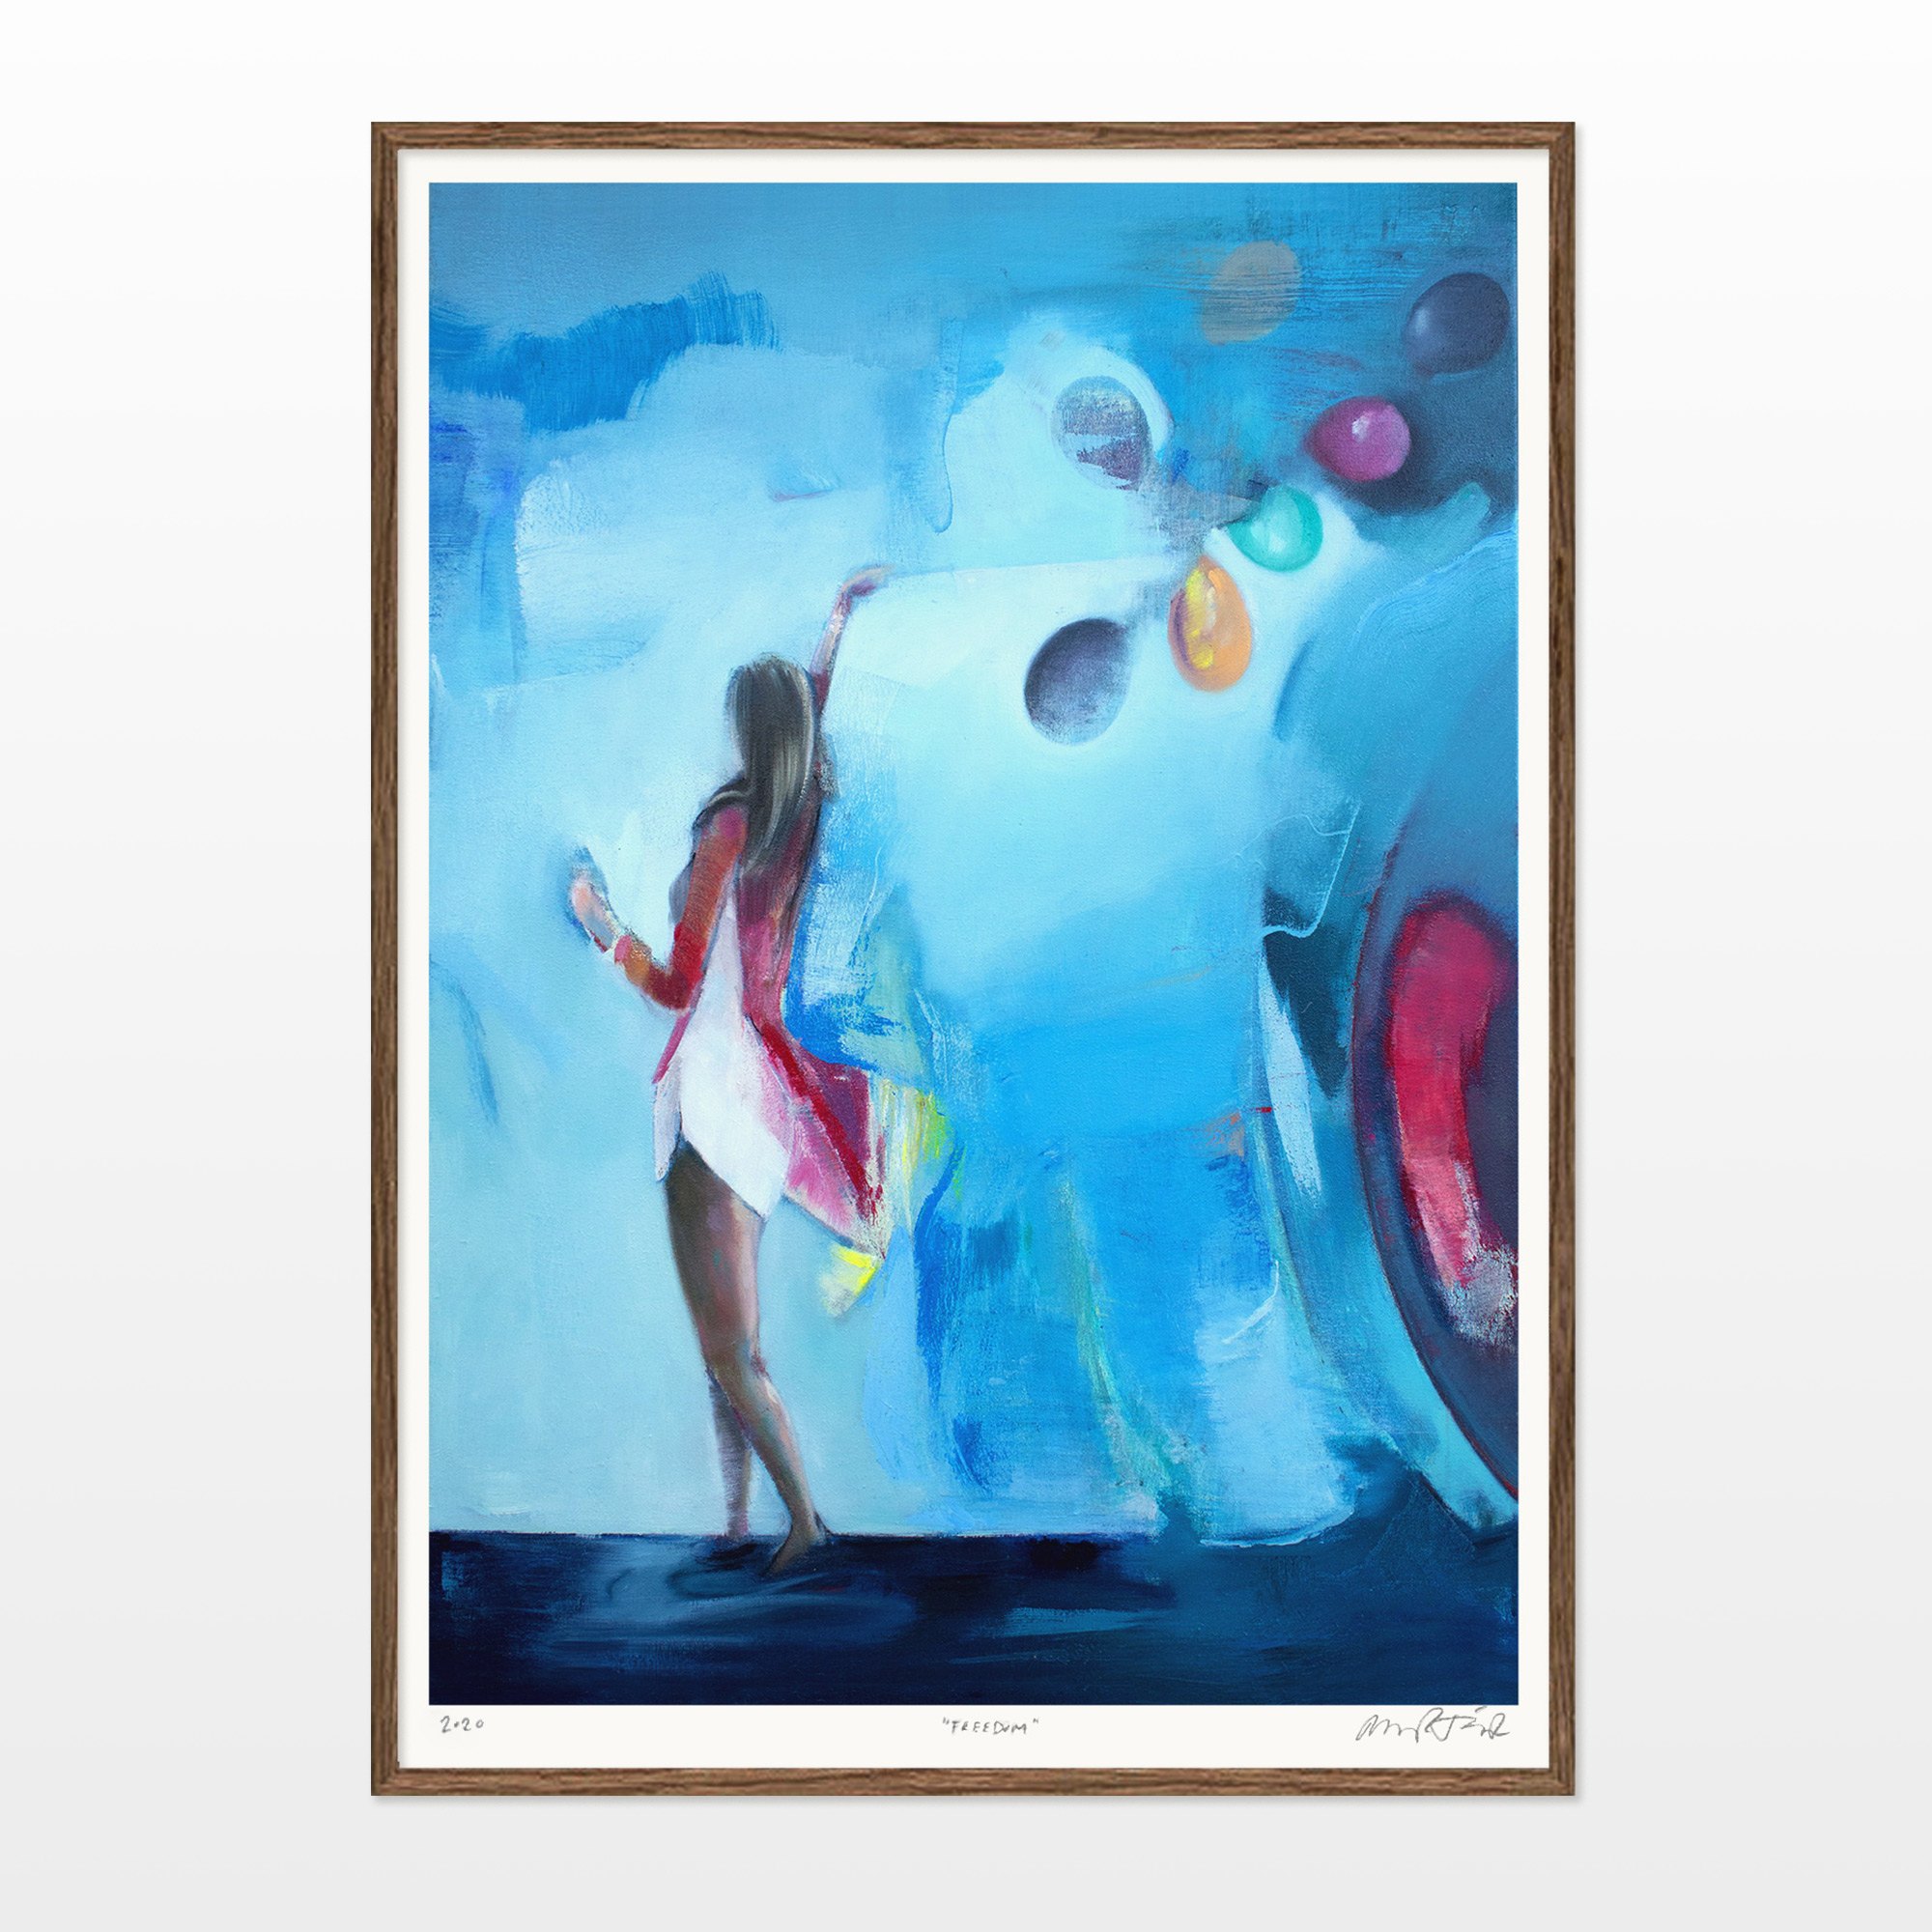 posters-prints, giclee-print, aesthetic, colorful, figurative, graphical, illustrative, pop, bodies, everyday life, oceans, blue, red, ink, paper, beach, beautiful, contemporary-art, interior, interior-design, love, modern, modern-art, nordic, party, posters, romantic, scandinavien, water, Buy original high quality art. Paintings, drawings, limited edition prints & posters by talented artists.